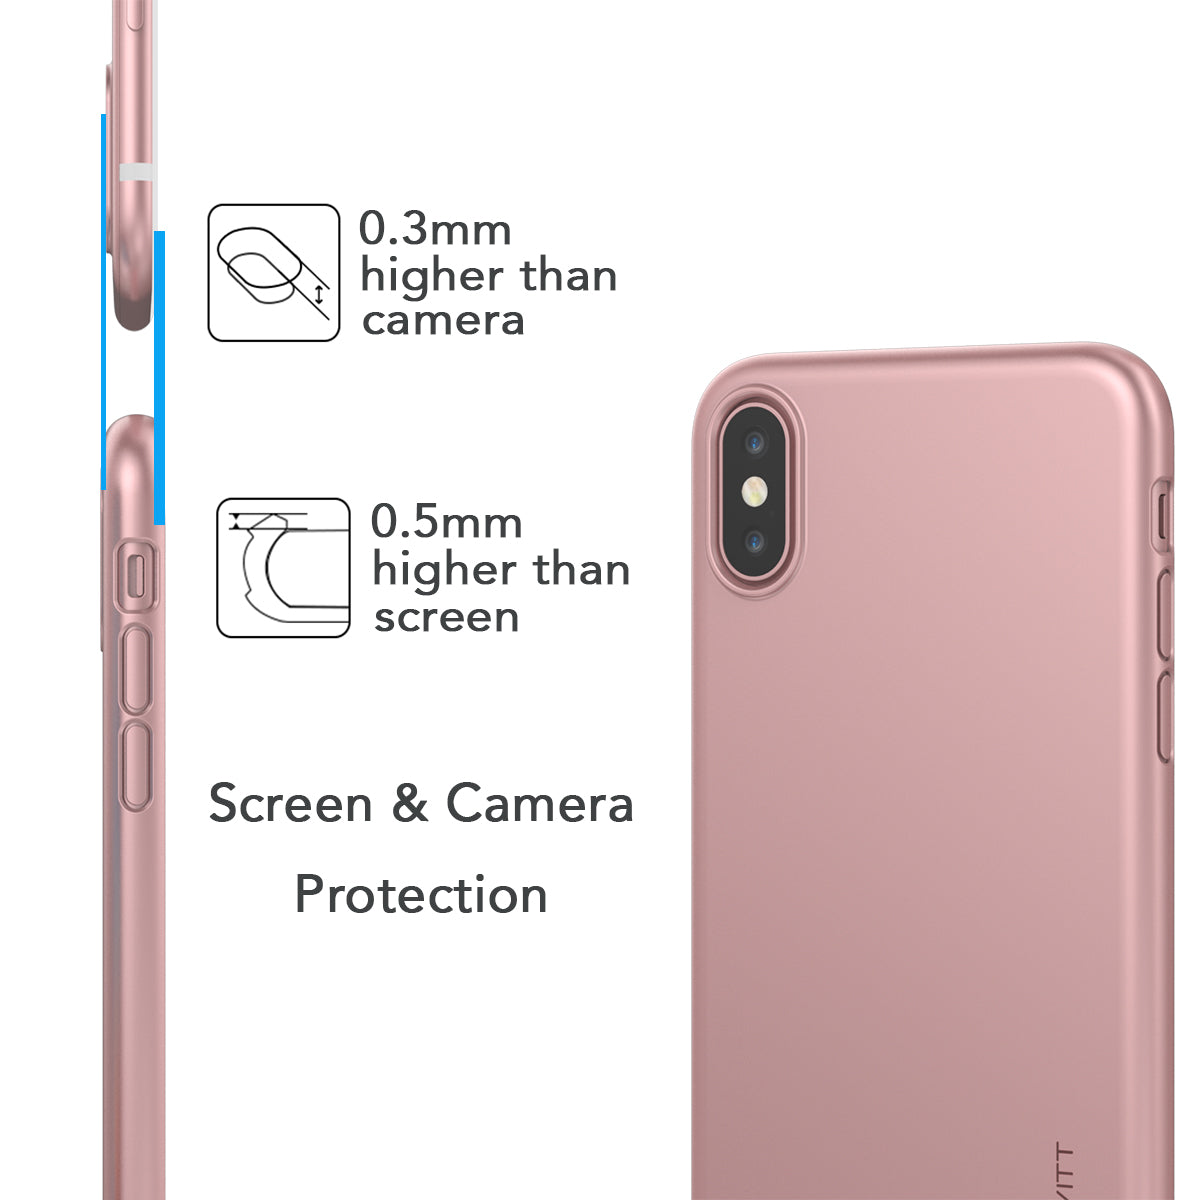 Luvvitt Svelte Slim Fit Hard Shell Case for iPhone XS / X - Rose Gold